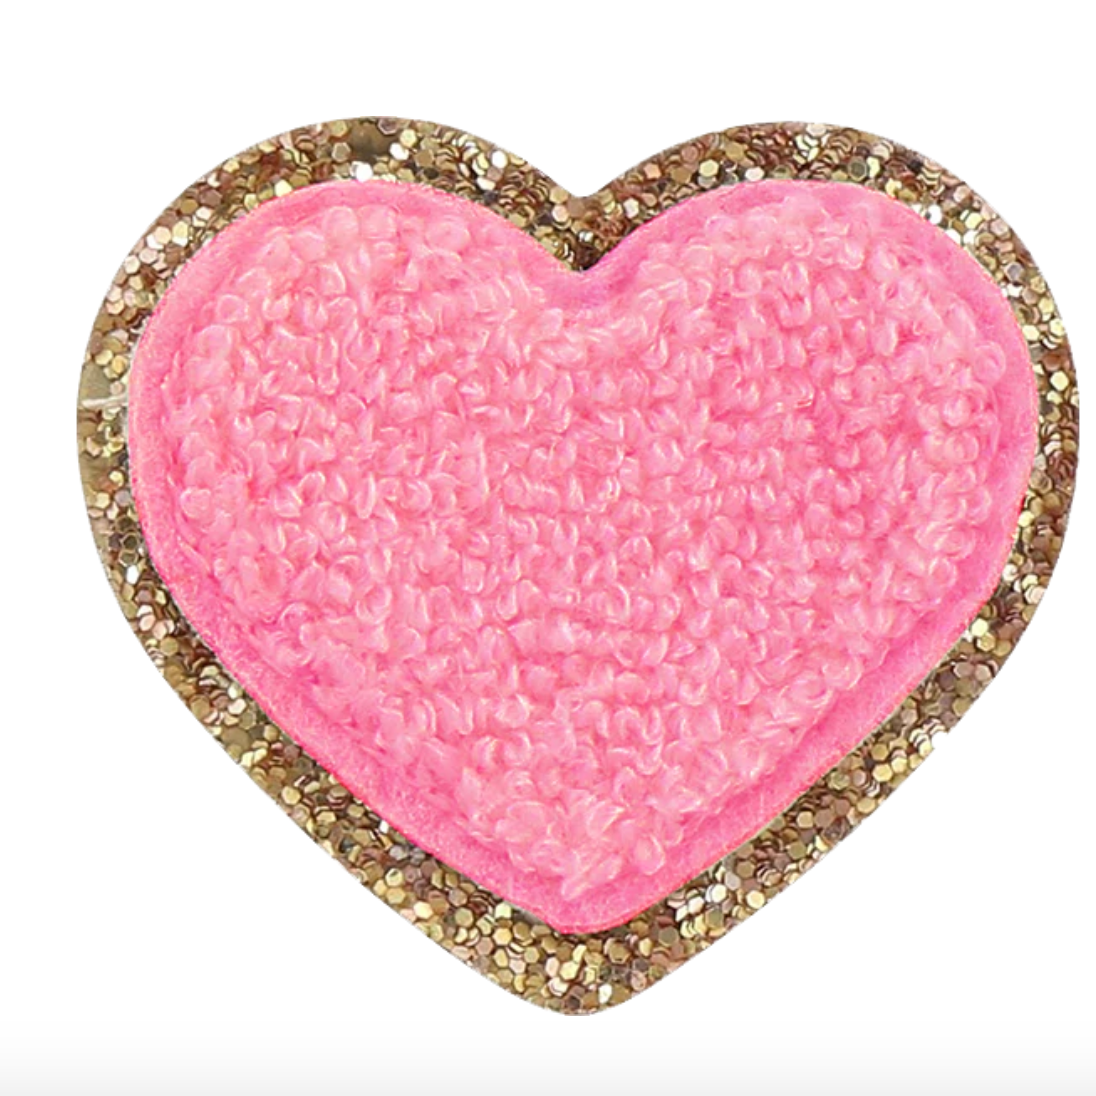 Barbie™ Way Glitter Patch | Embroidered Patch - Stoney Clover Lane